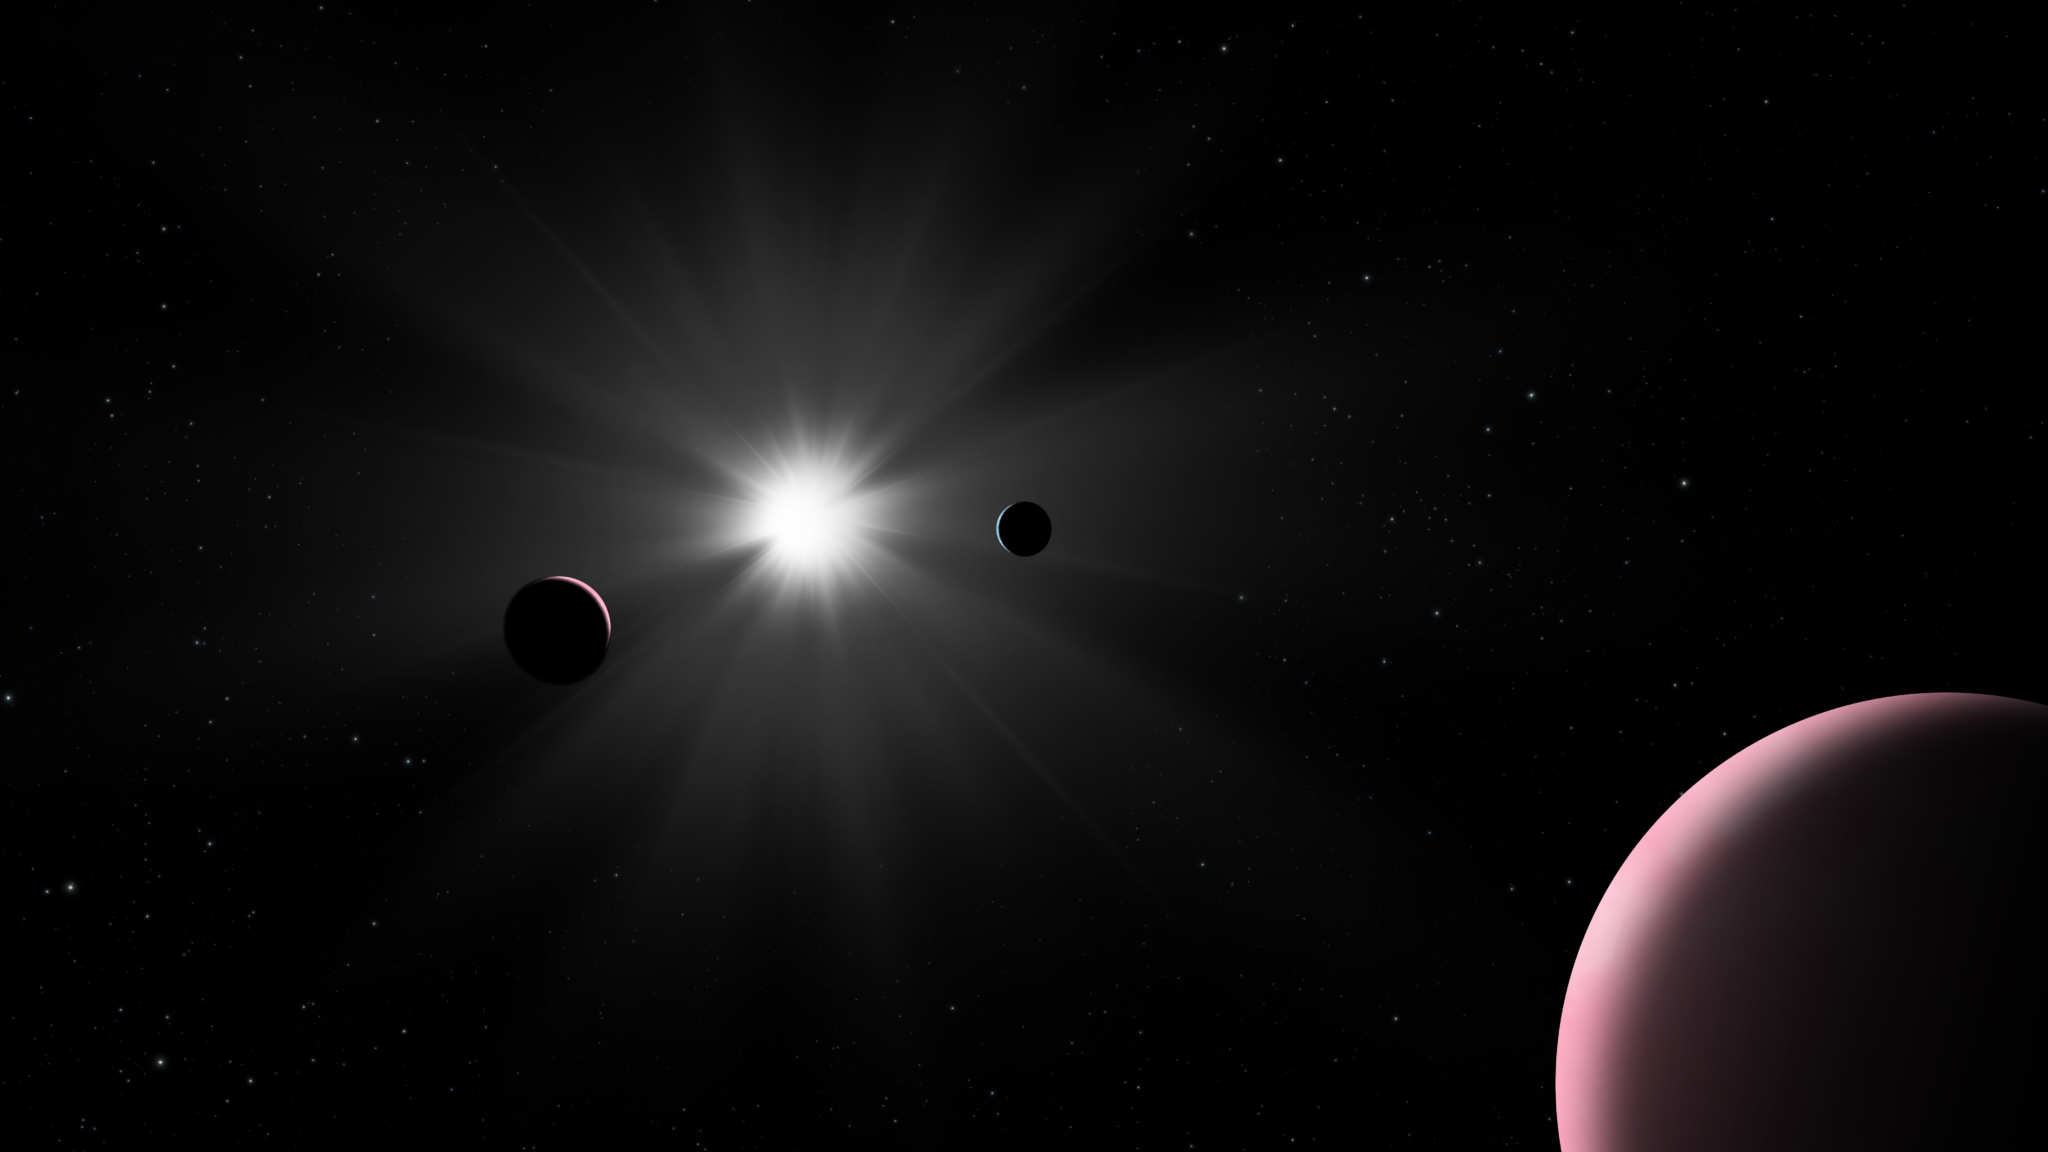 Exoplanet photobombs observations of its star system